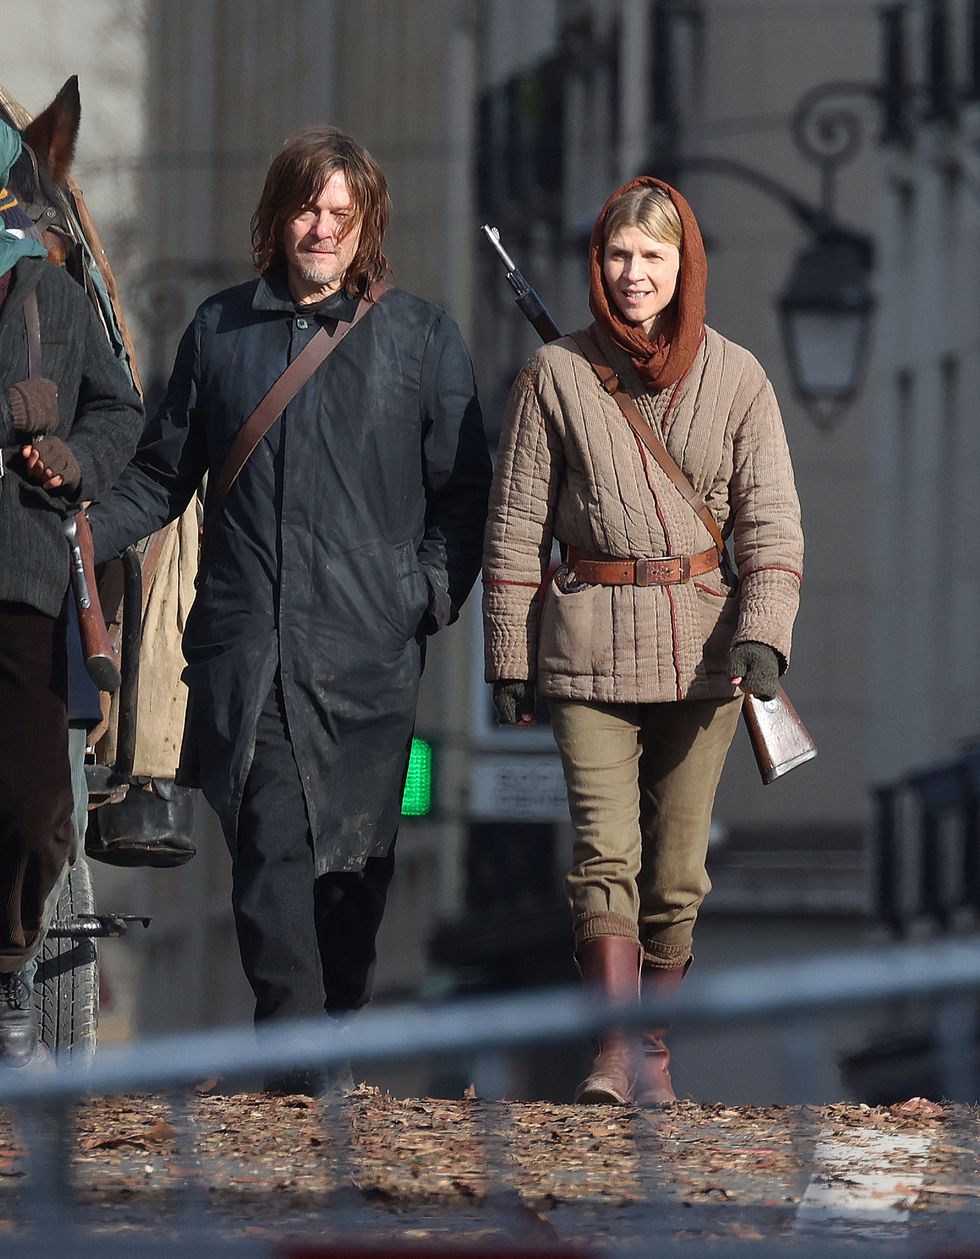 norman reedus and clémence poésy are on the set of the walking dead in paris